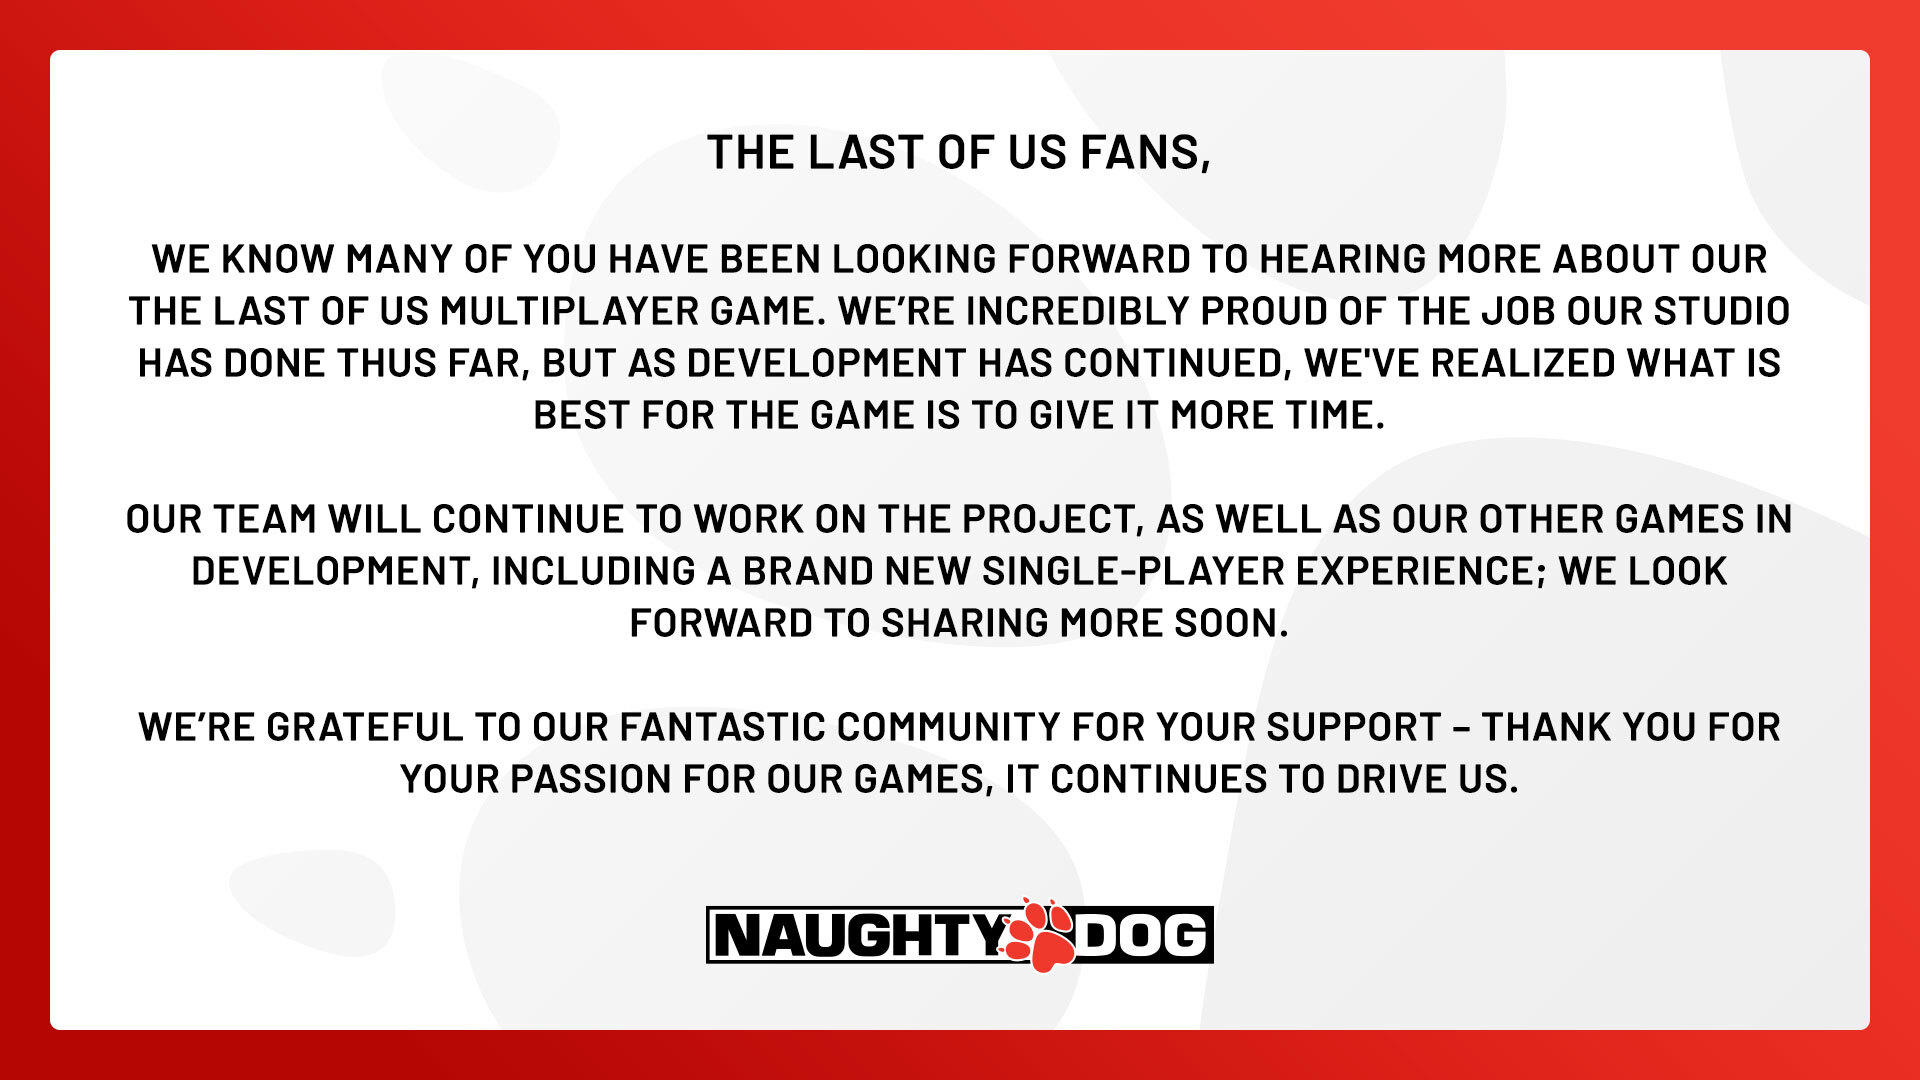 The Last of Us fans,
We know many of you have been looking forward to hearing more about our The Last of Us multiplayer game. We’re incredibly proud of the job our studio has done thus far, but as development has continued, we've realized what is best for the game is to give it more time.
Our team will continue to work on the project, as well as our other games in development, including a brand new single-player experience; we look forward to sharing more soon.
We’re grateful to our fantastic community for your support – thank you for your passion for our games, it continues to drive us.